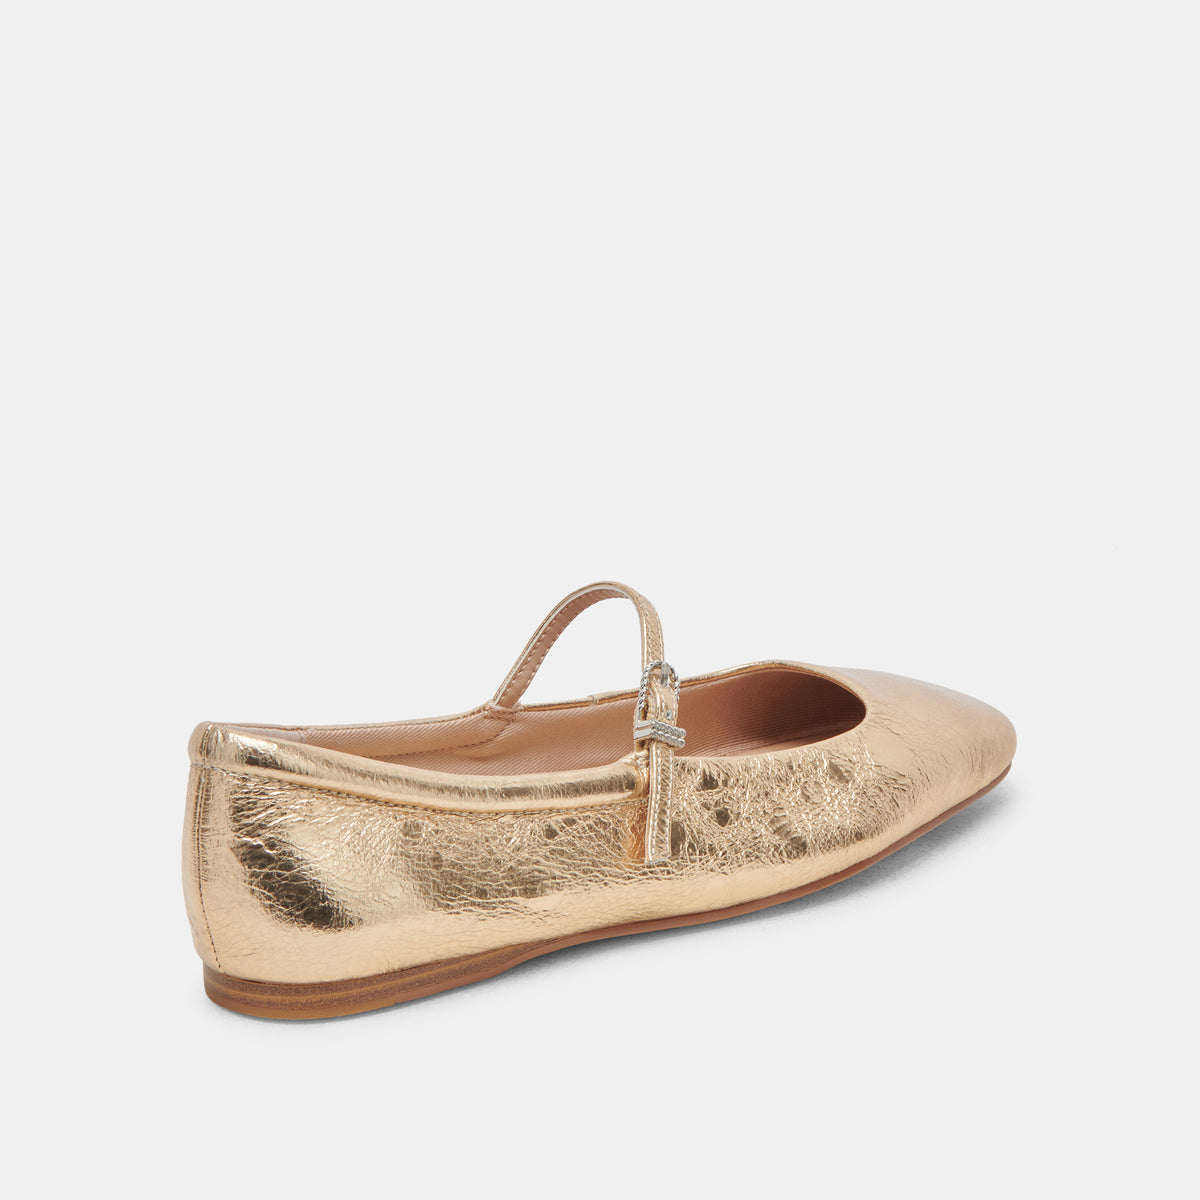 REYES BALLET FLATS GOLD DISTRESSED LEATHER – Dolce Vita